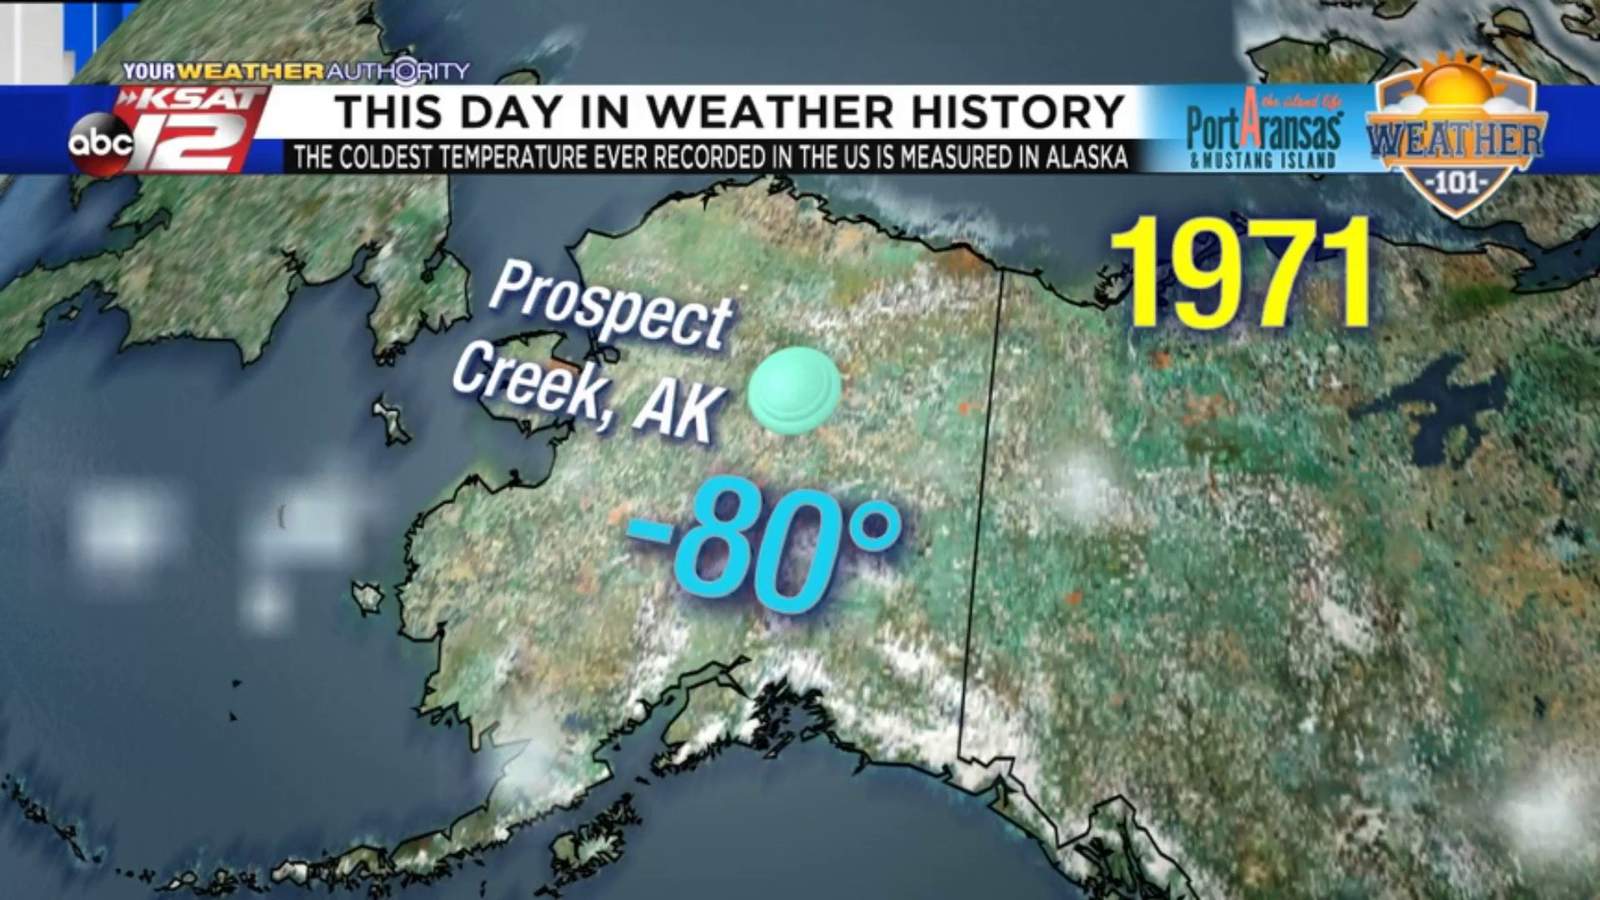 This Day in Weather History: January 23rd